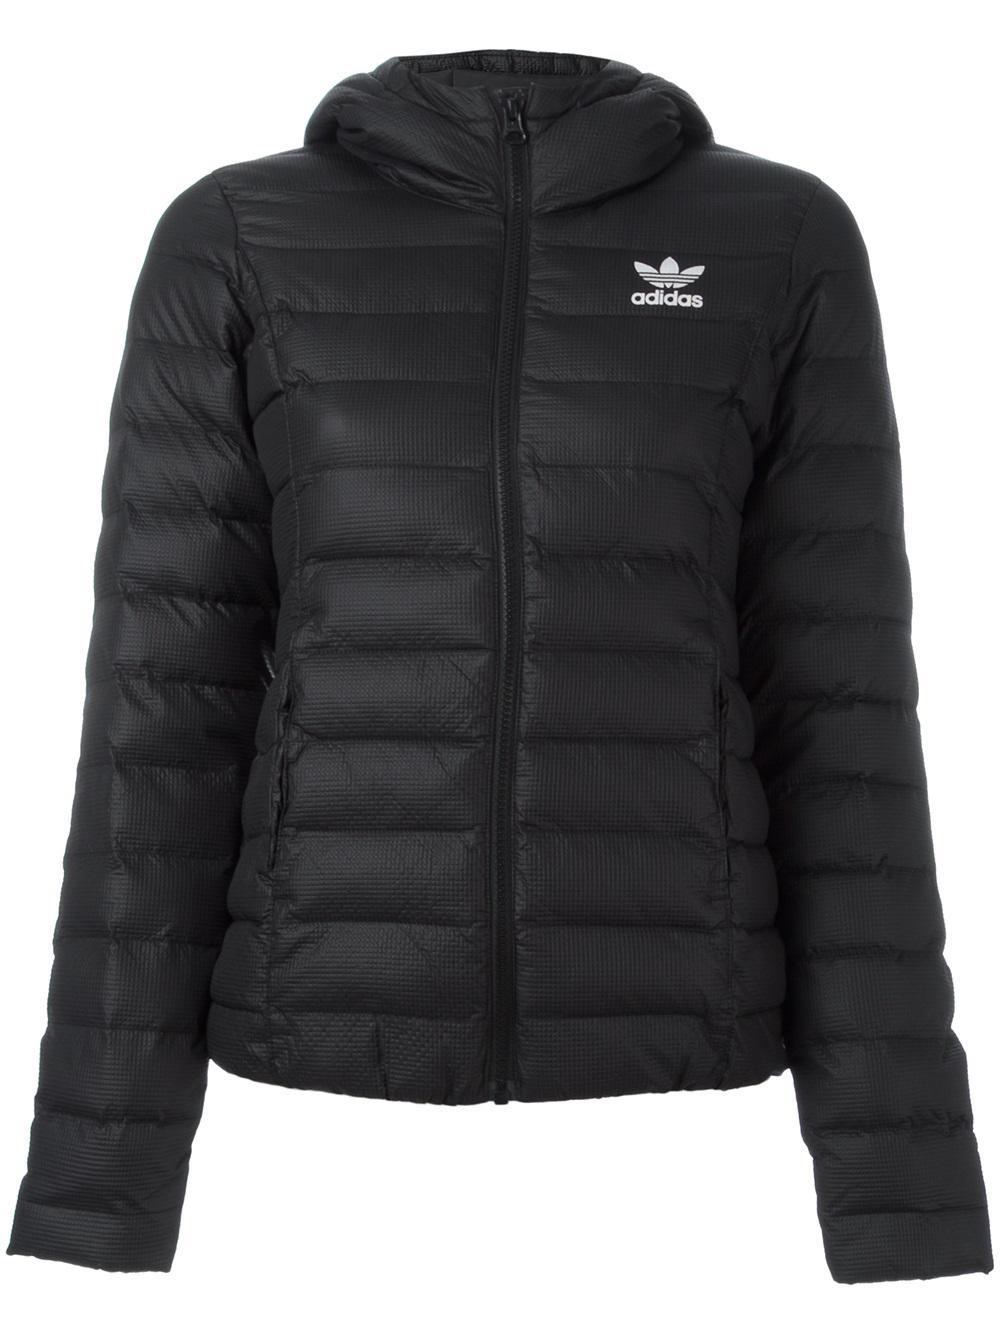 adidas Originals Synthetic Slim Fit Padded Jacket in Black - Lyst